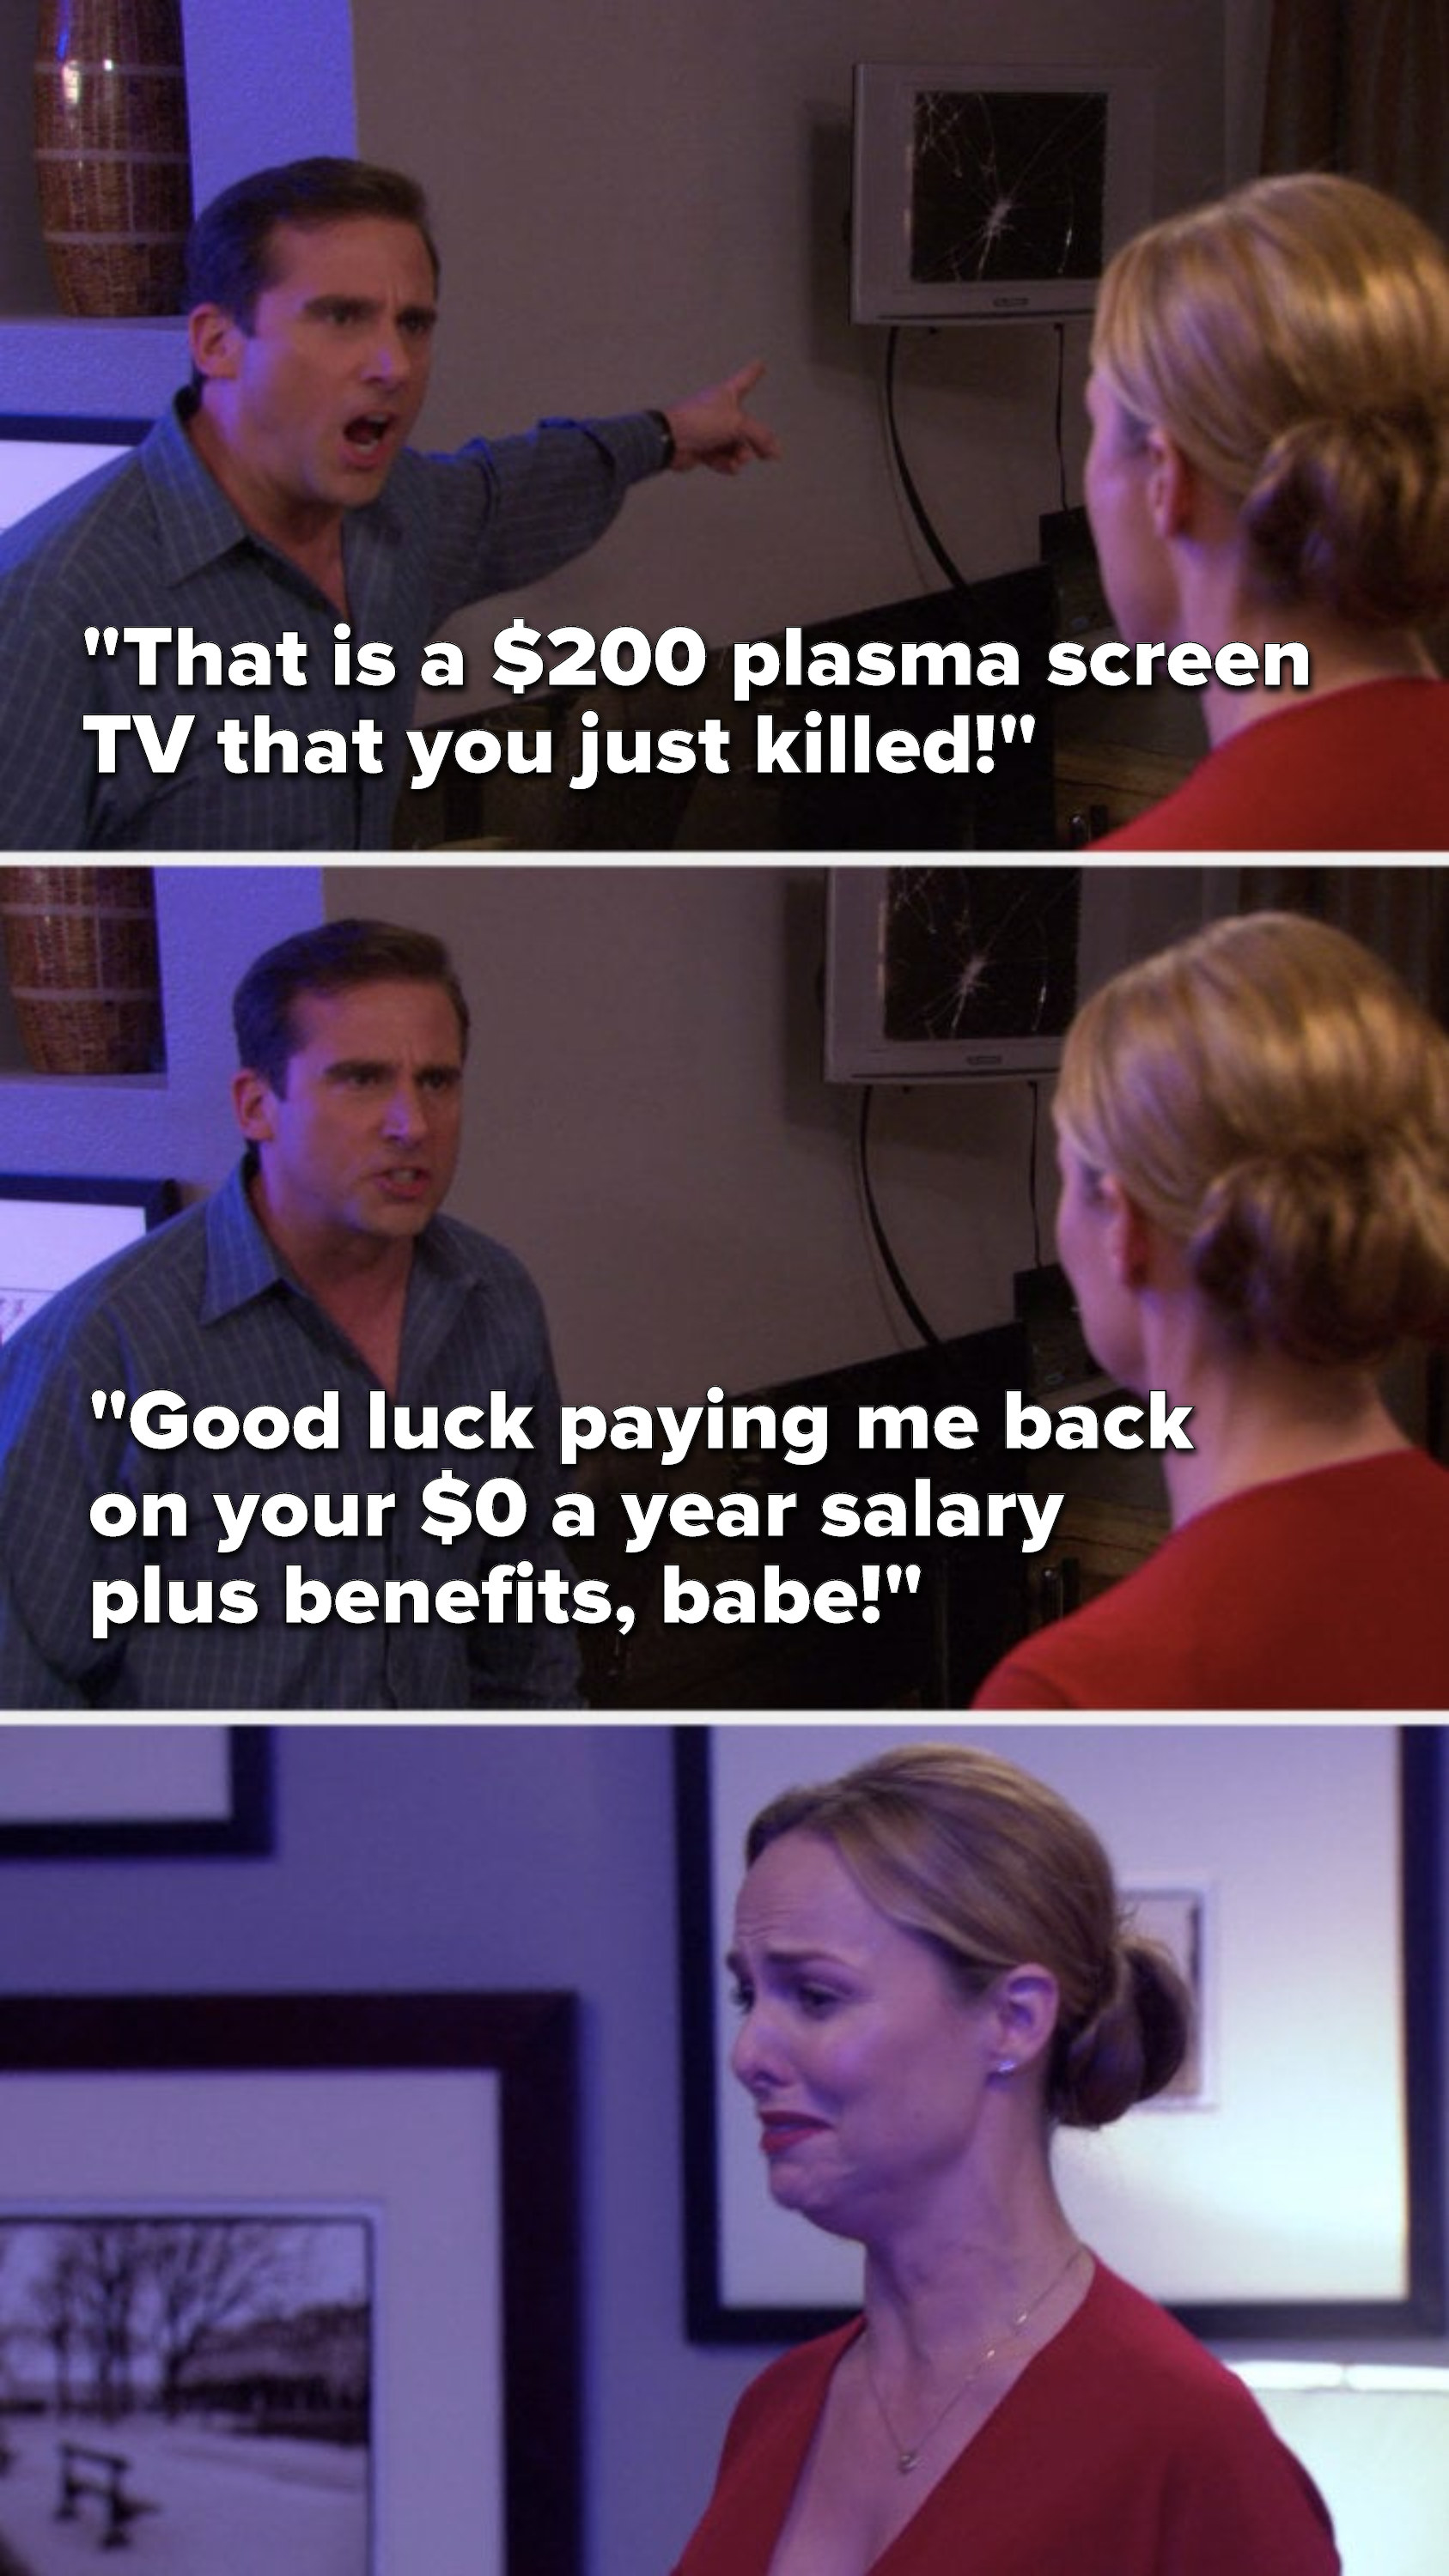 Michael yells, &quot;That is a $200 plasma screen TV that you just killed, Good luck paying me back on your $0 a year salary plus benefits, babe&quot; and Jan cries